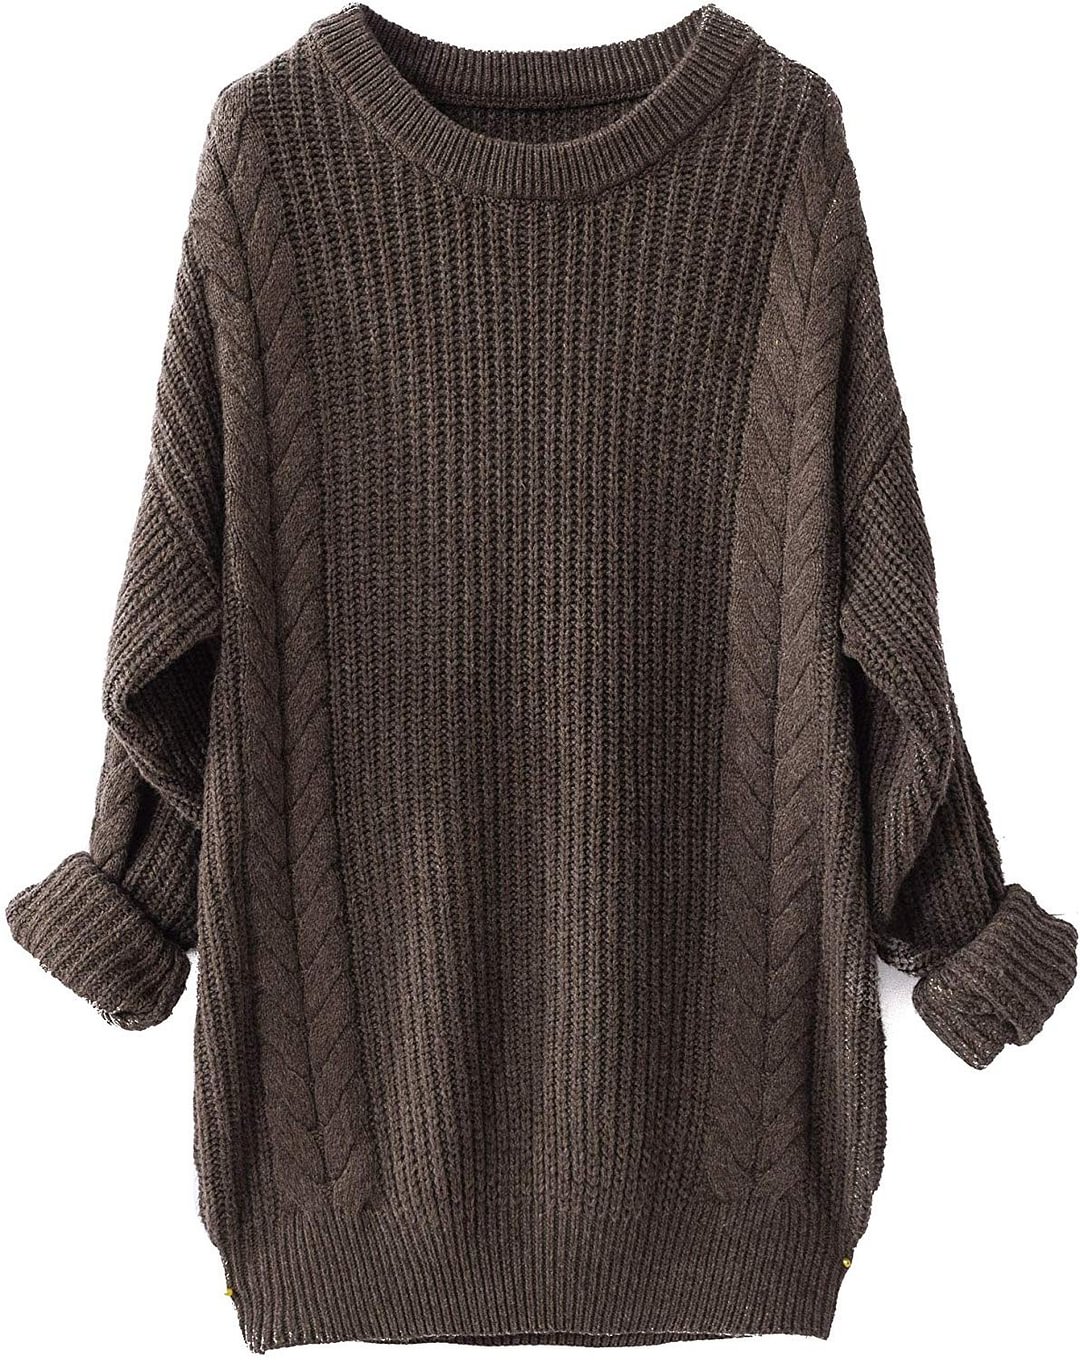 Women's Cashmere Oversized Loose Knitted Crew Neck Long Sleeve Winter Warm Wool Pullover Long Sweater Dresses Tops